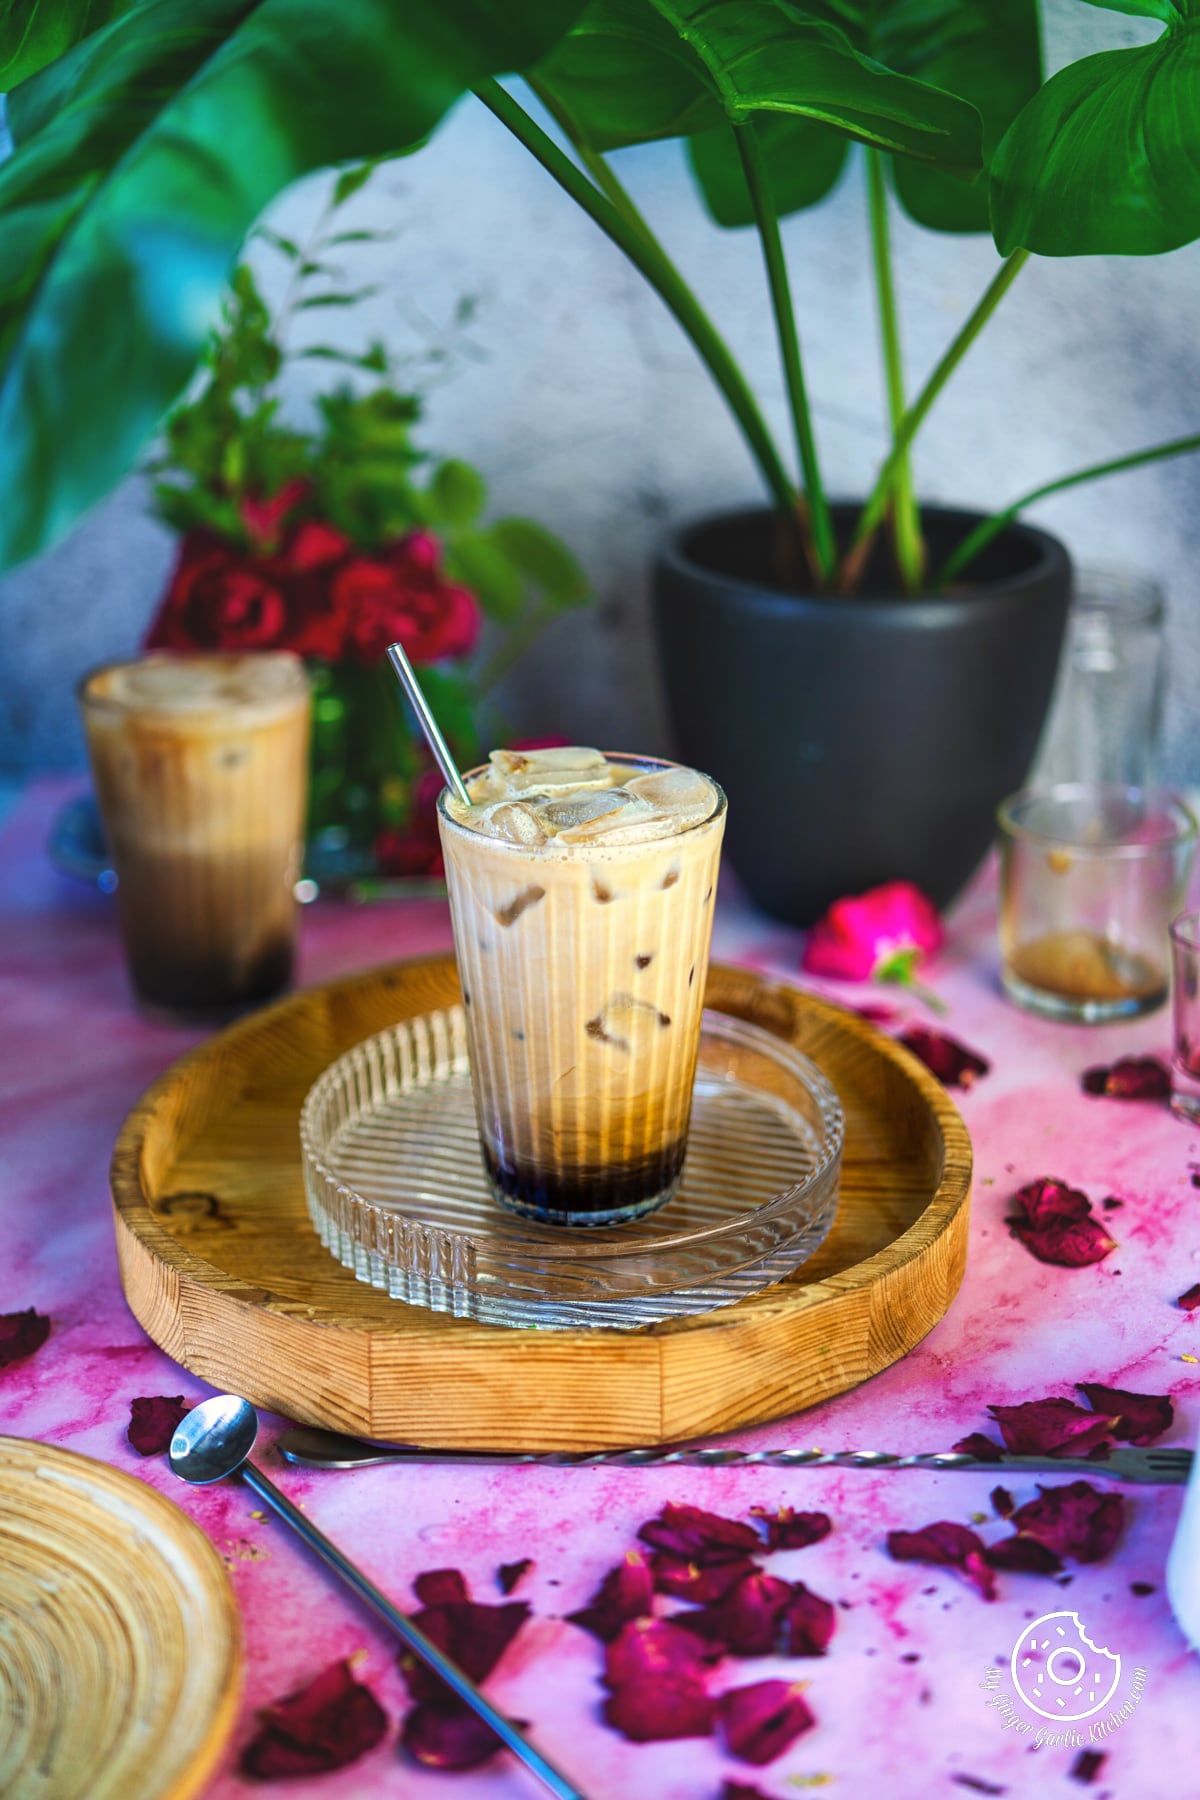 Picture of iced rose latte glass with some rose petals and flowers.